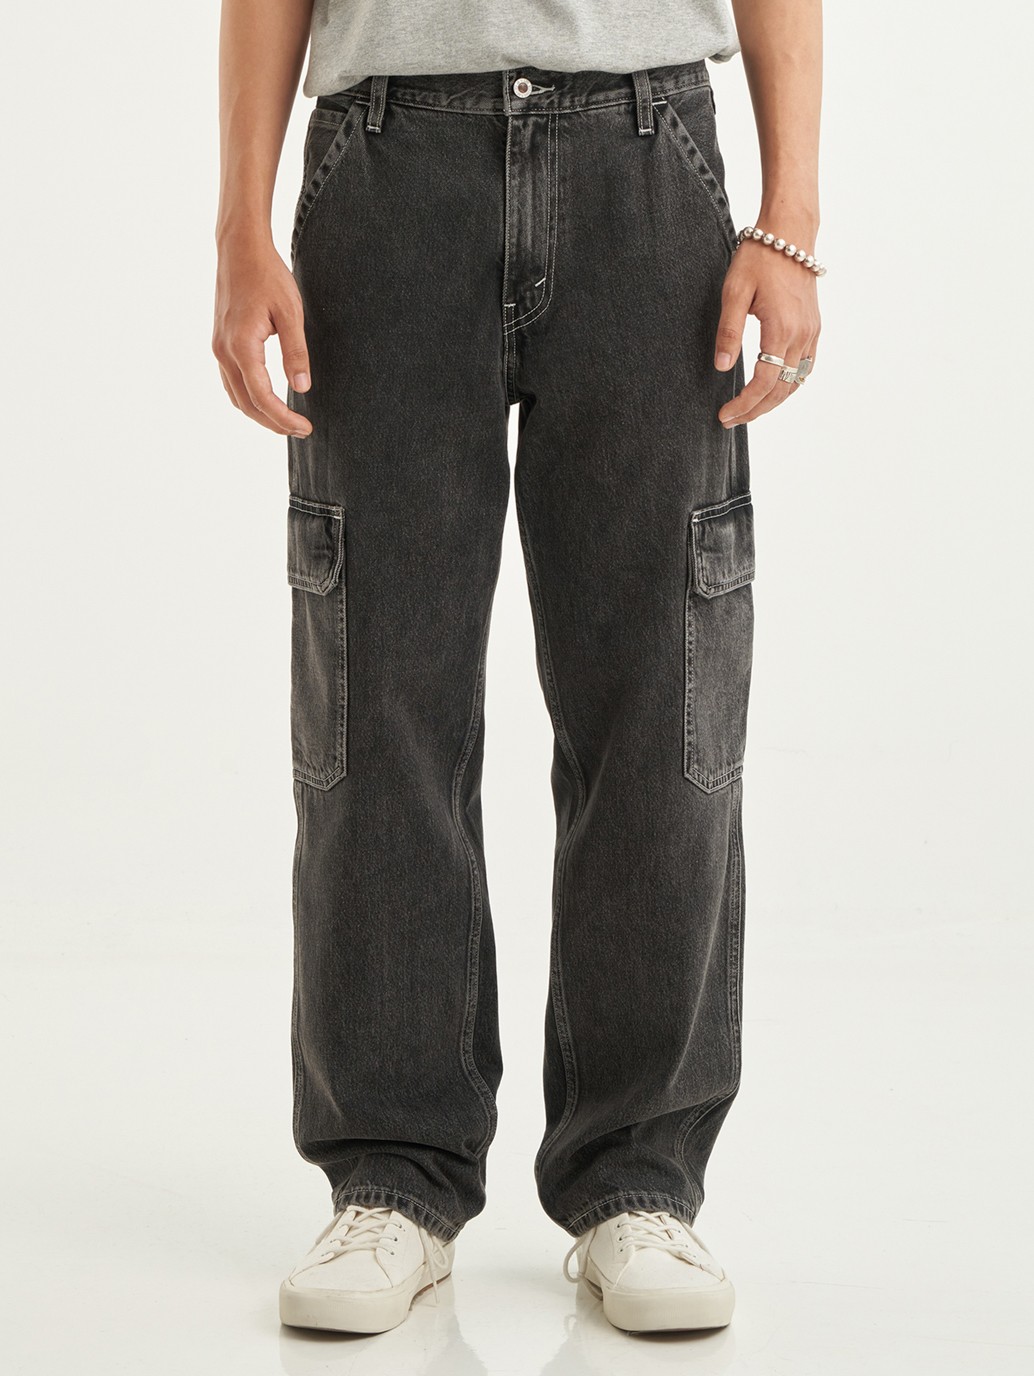 Levi's Cargo Pant | SOME contrast